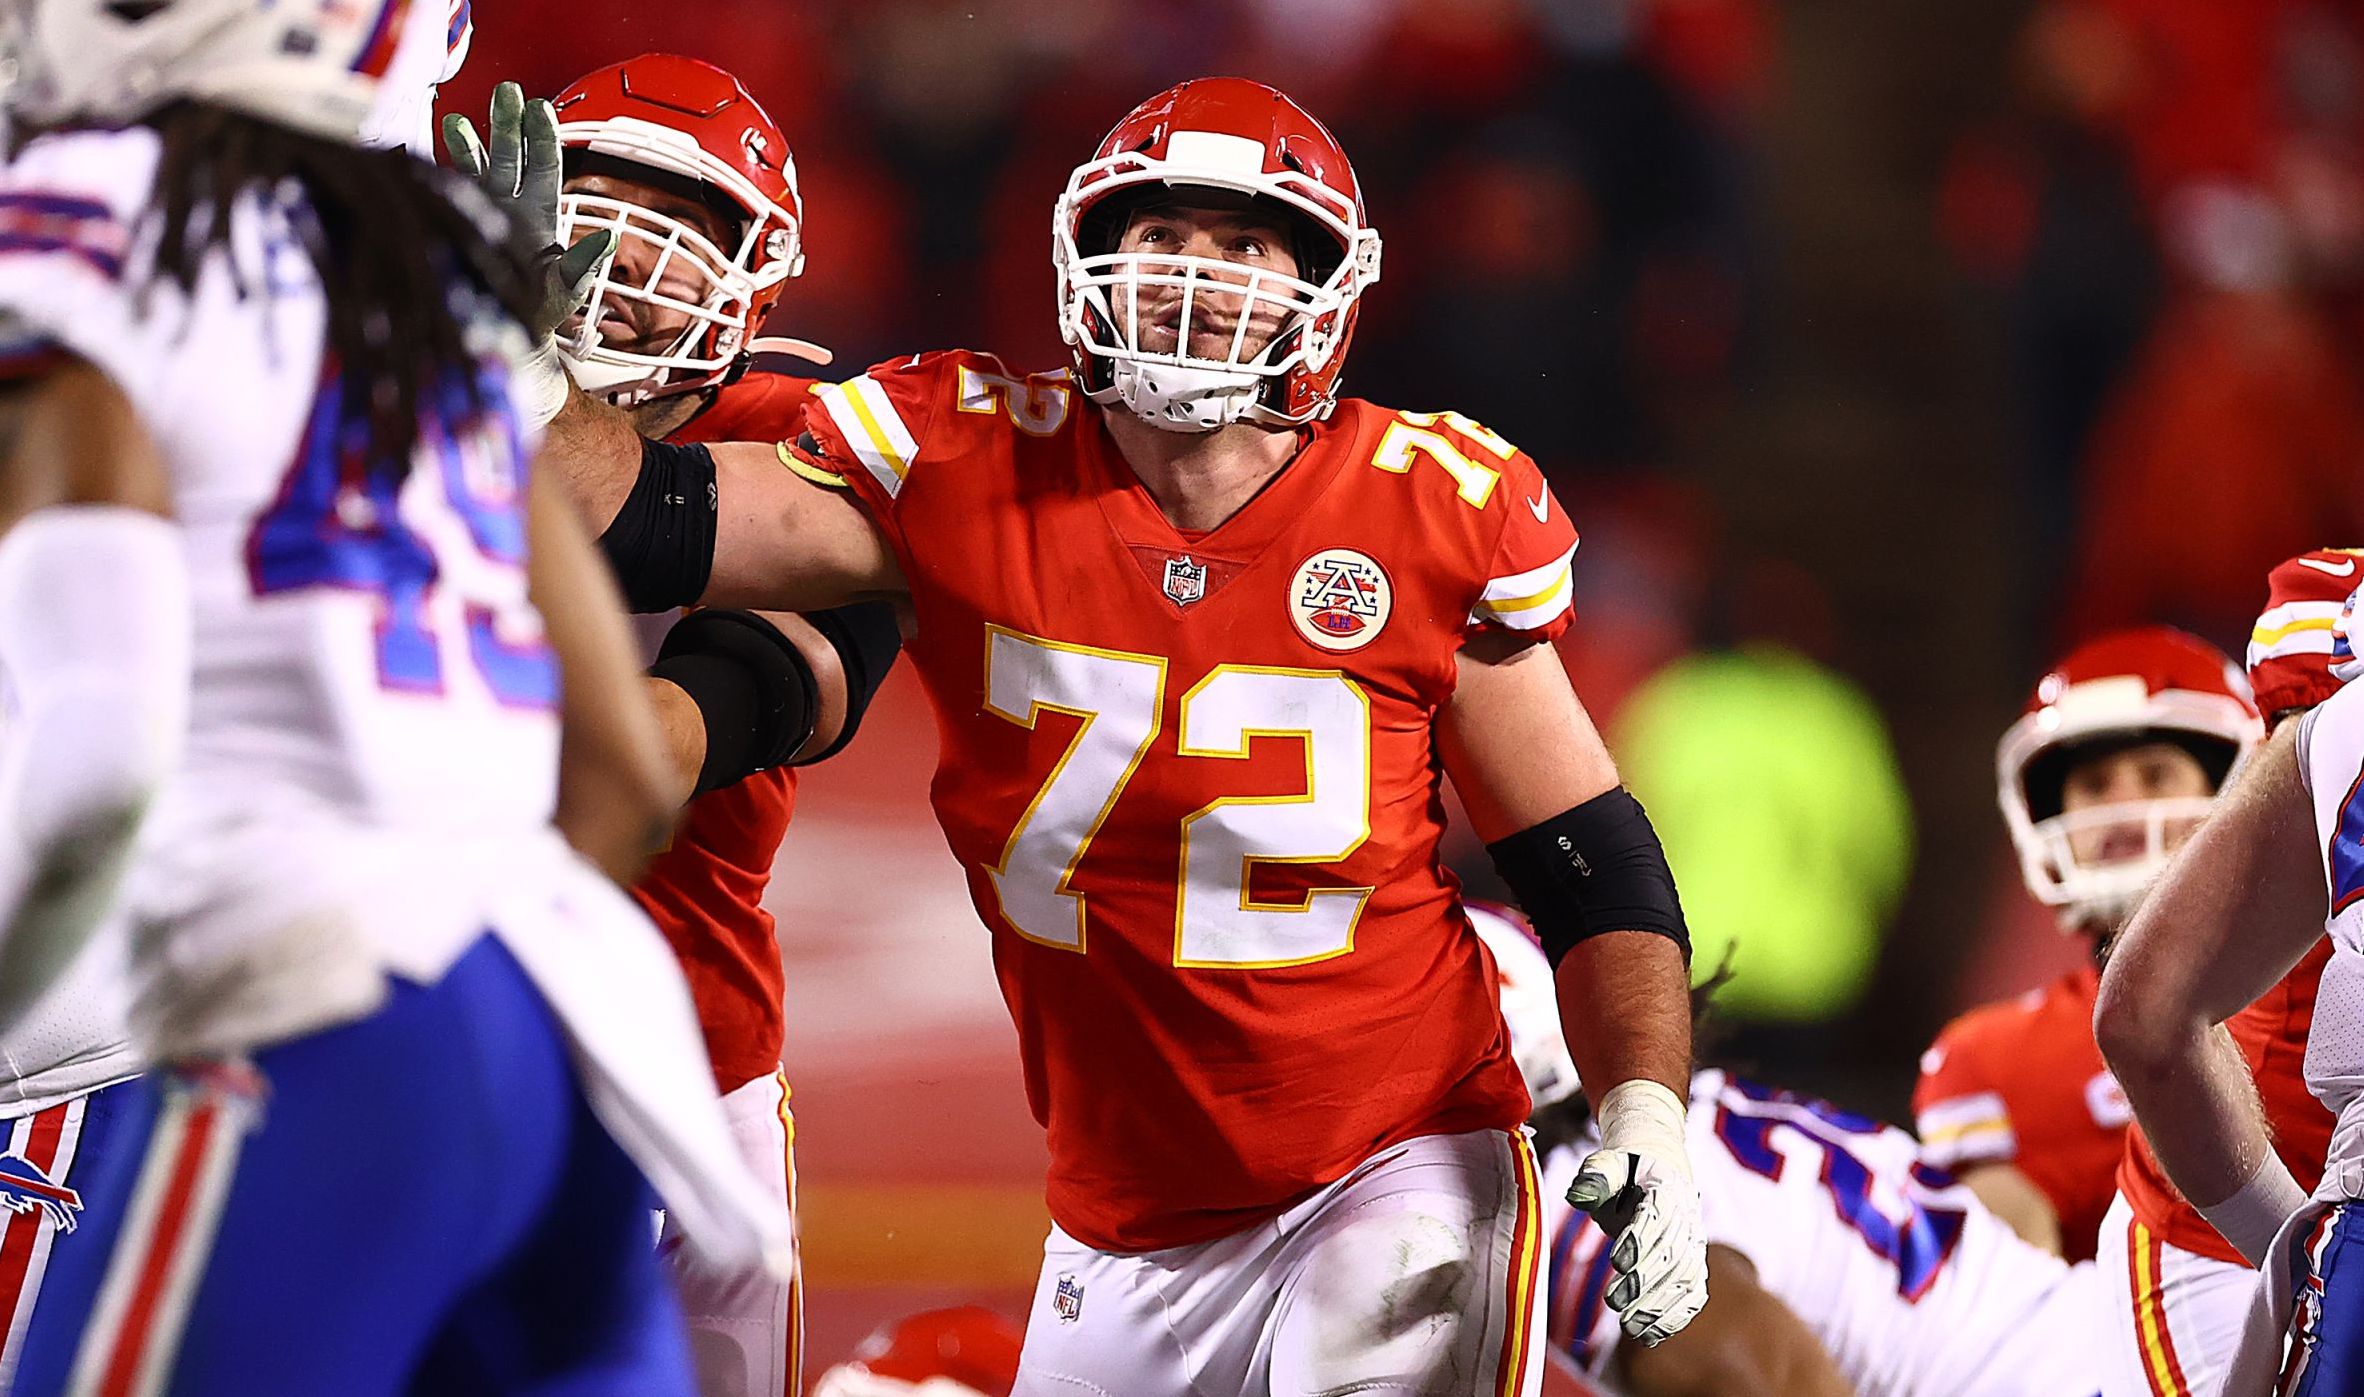 Chiefs LT Eric Fisher Likely Out for Super Bowl After Achilles Injury